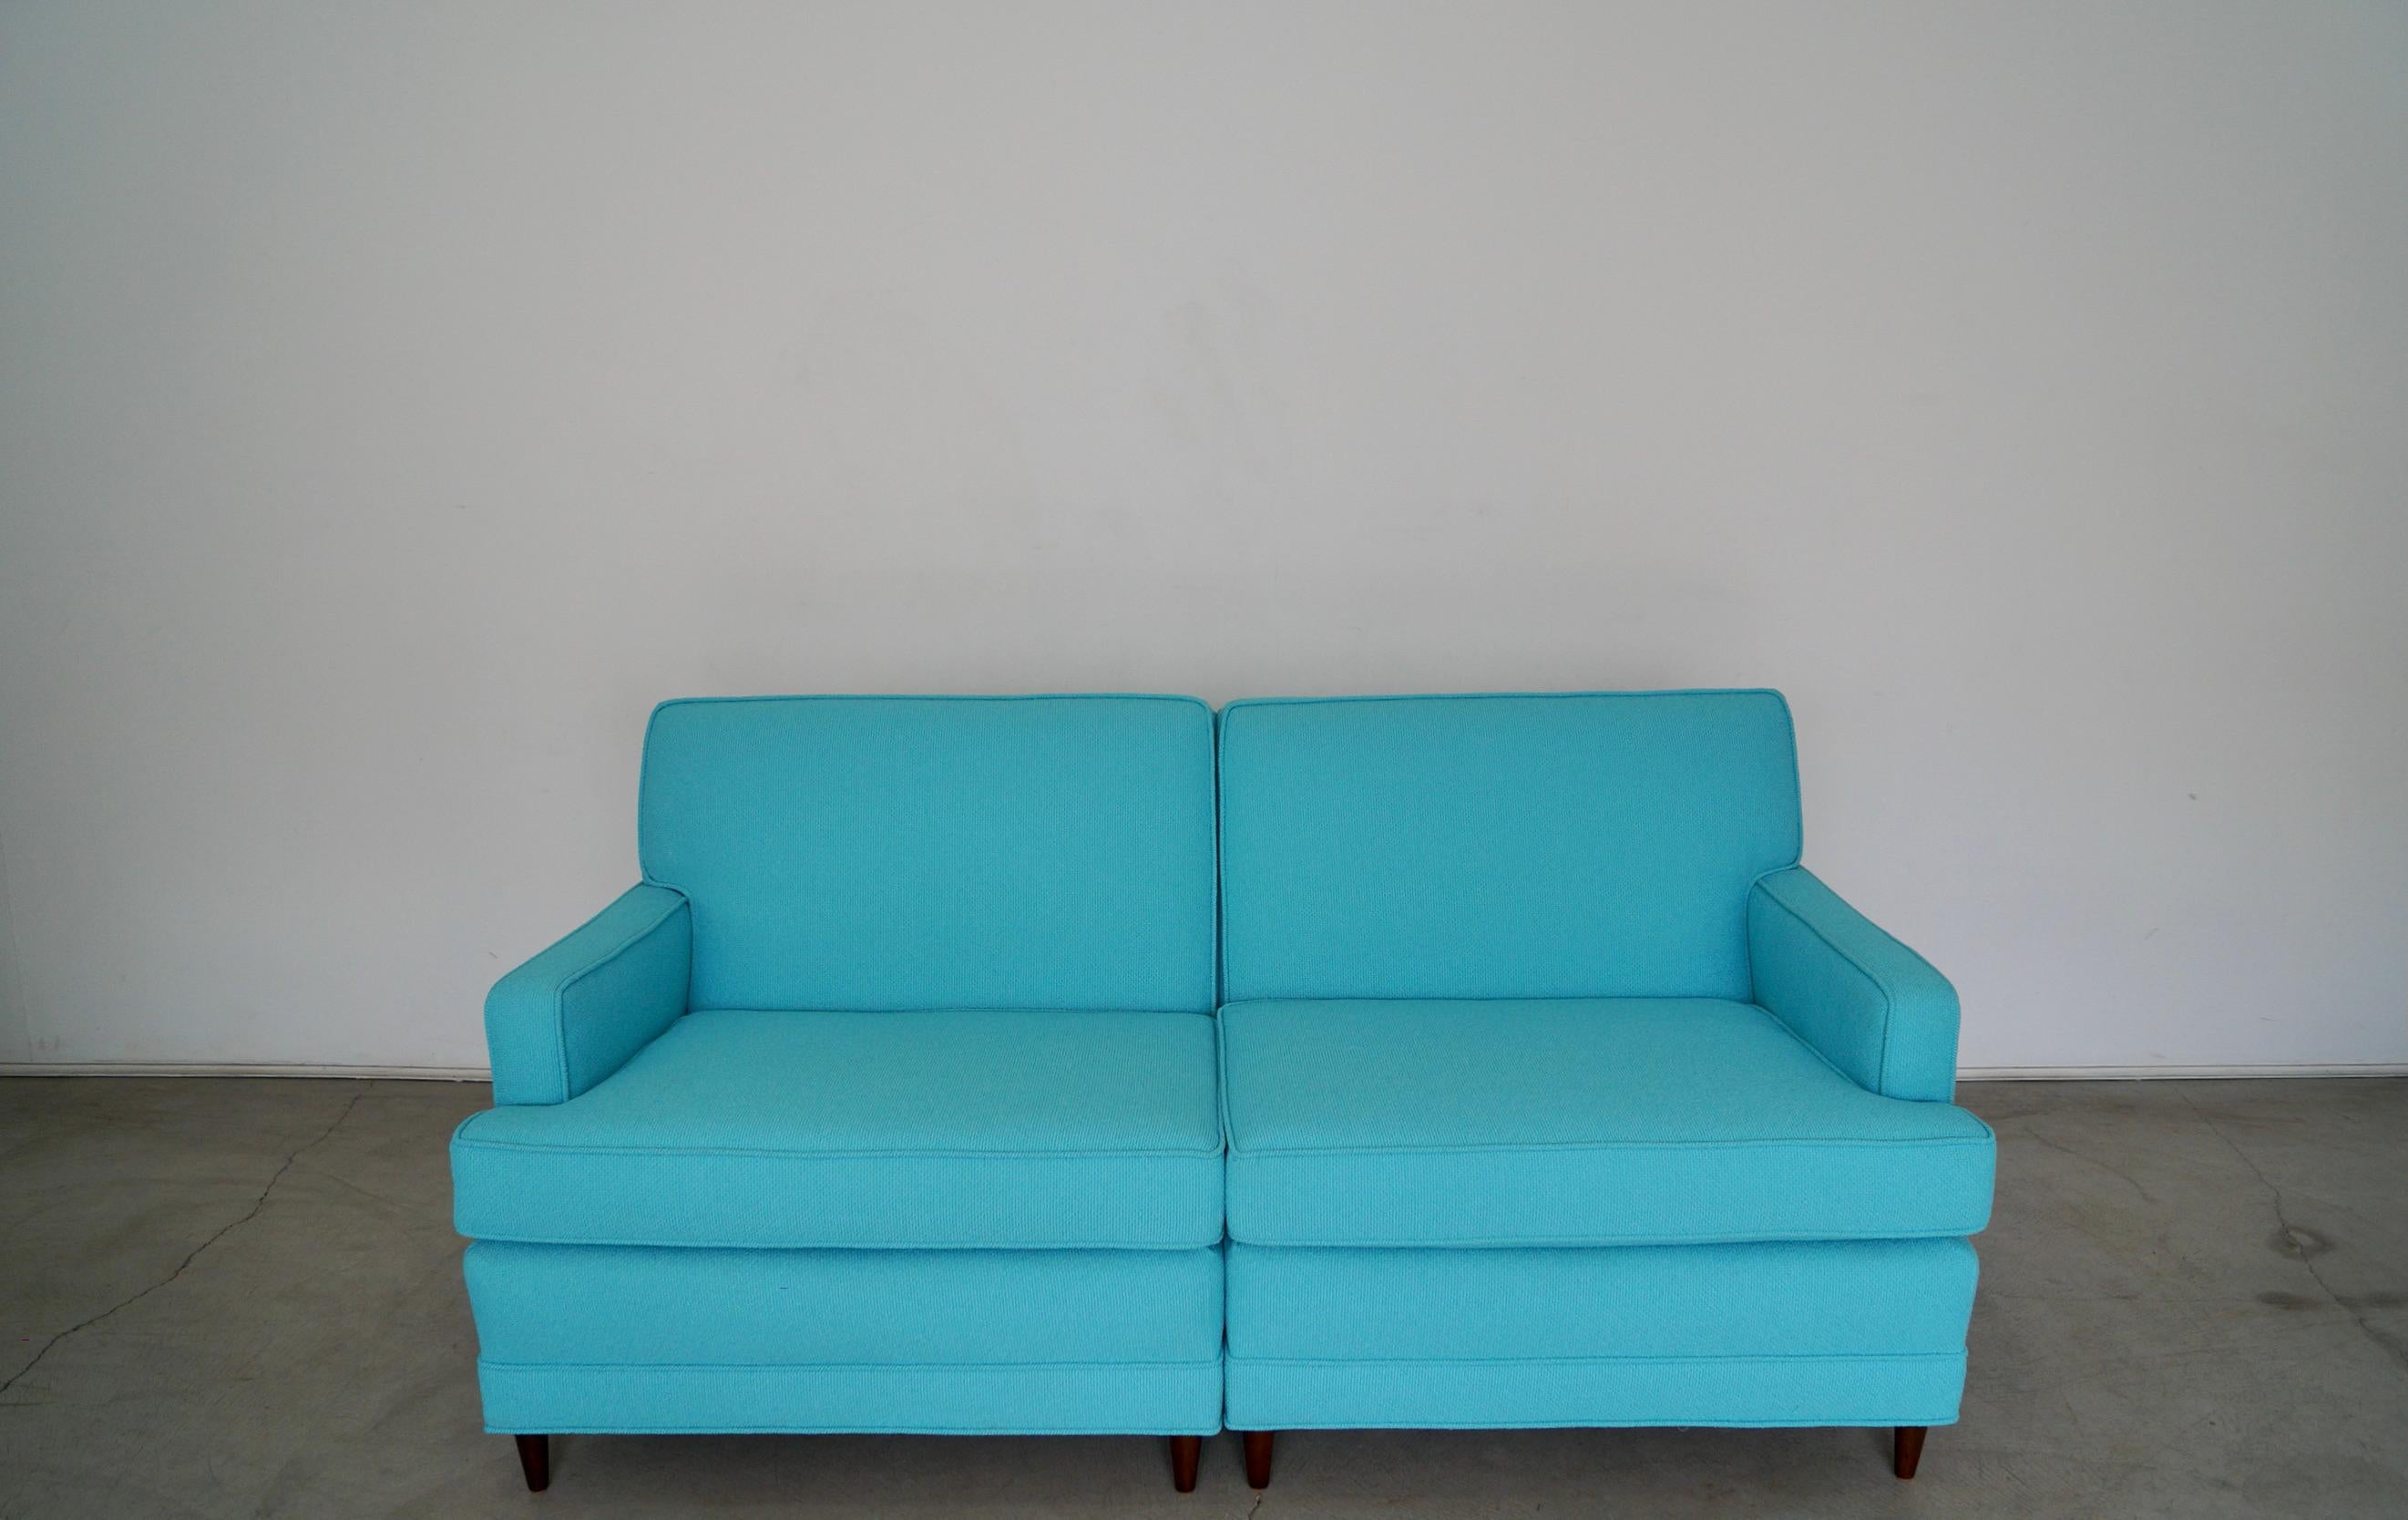 Vintage Mid-Century Modern lounge couch for sale. From the 1950's, and has been professionally reupholstered in new fabric and foam. It's a two-piece lounge sofa with two lounge chairs that can be separated or placed together. The fabric is a